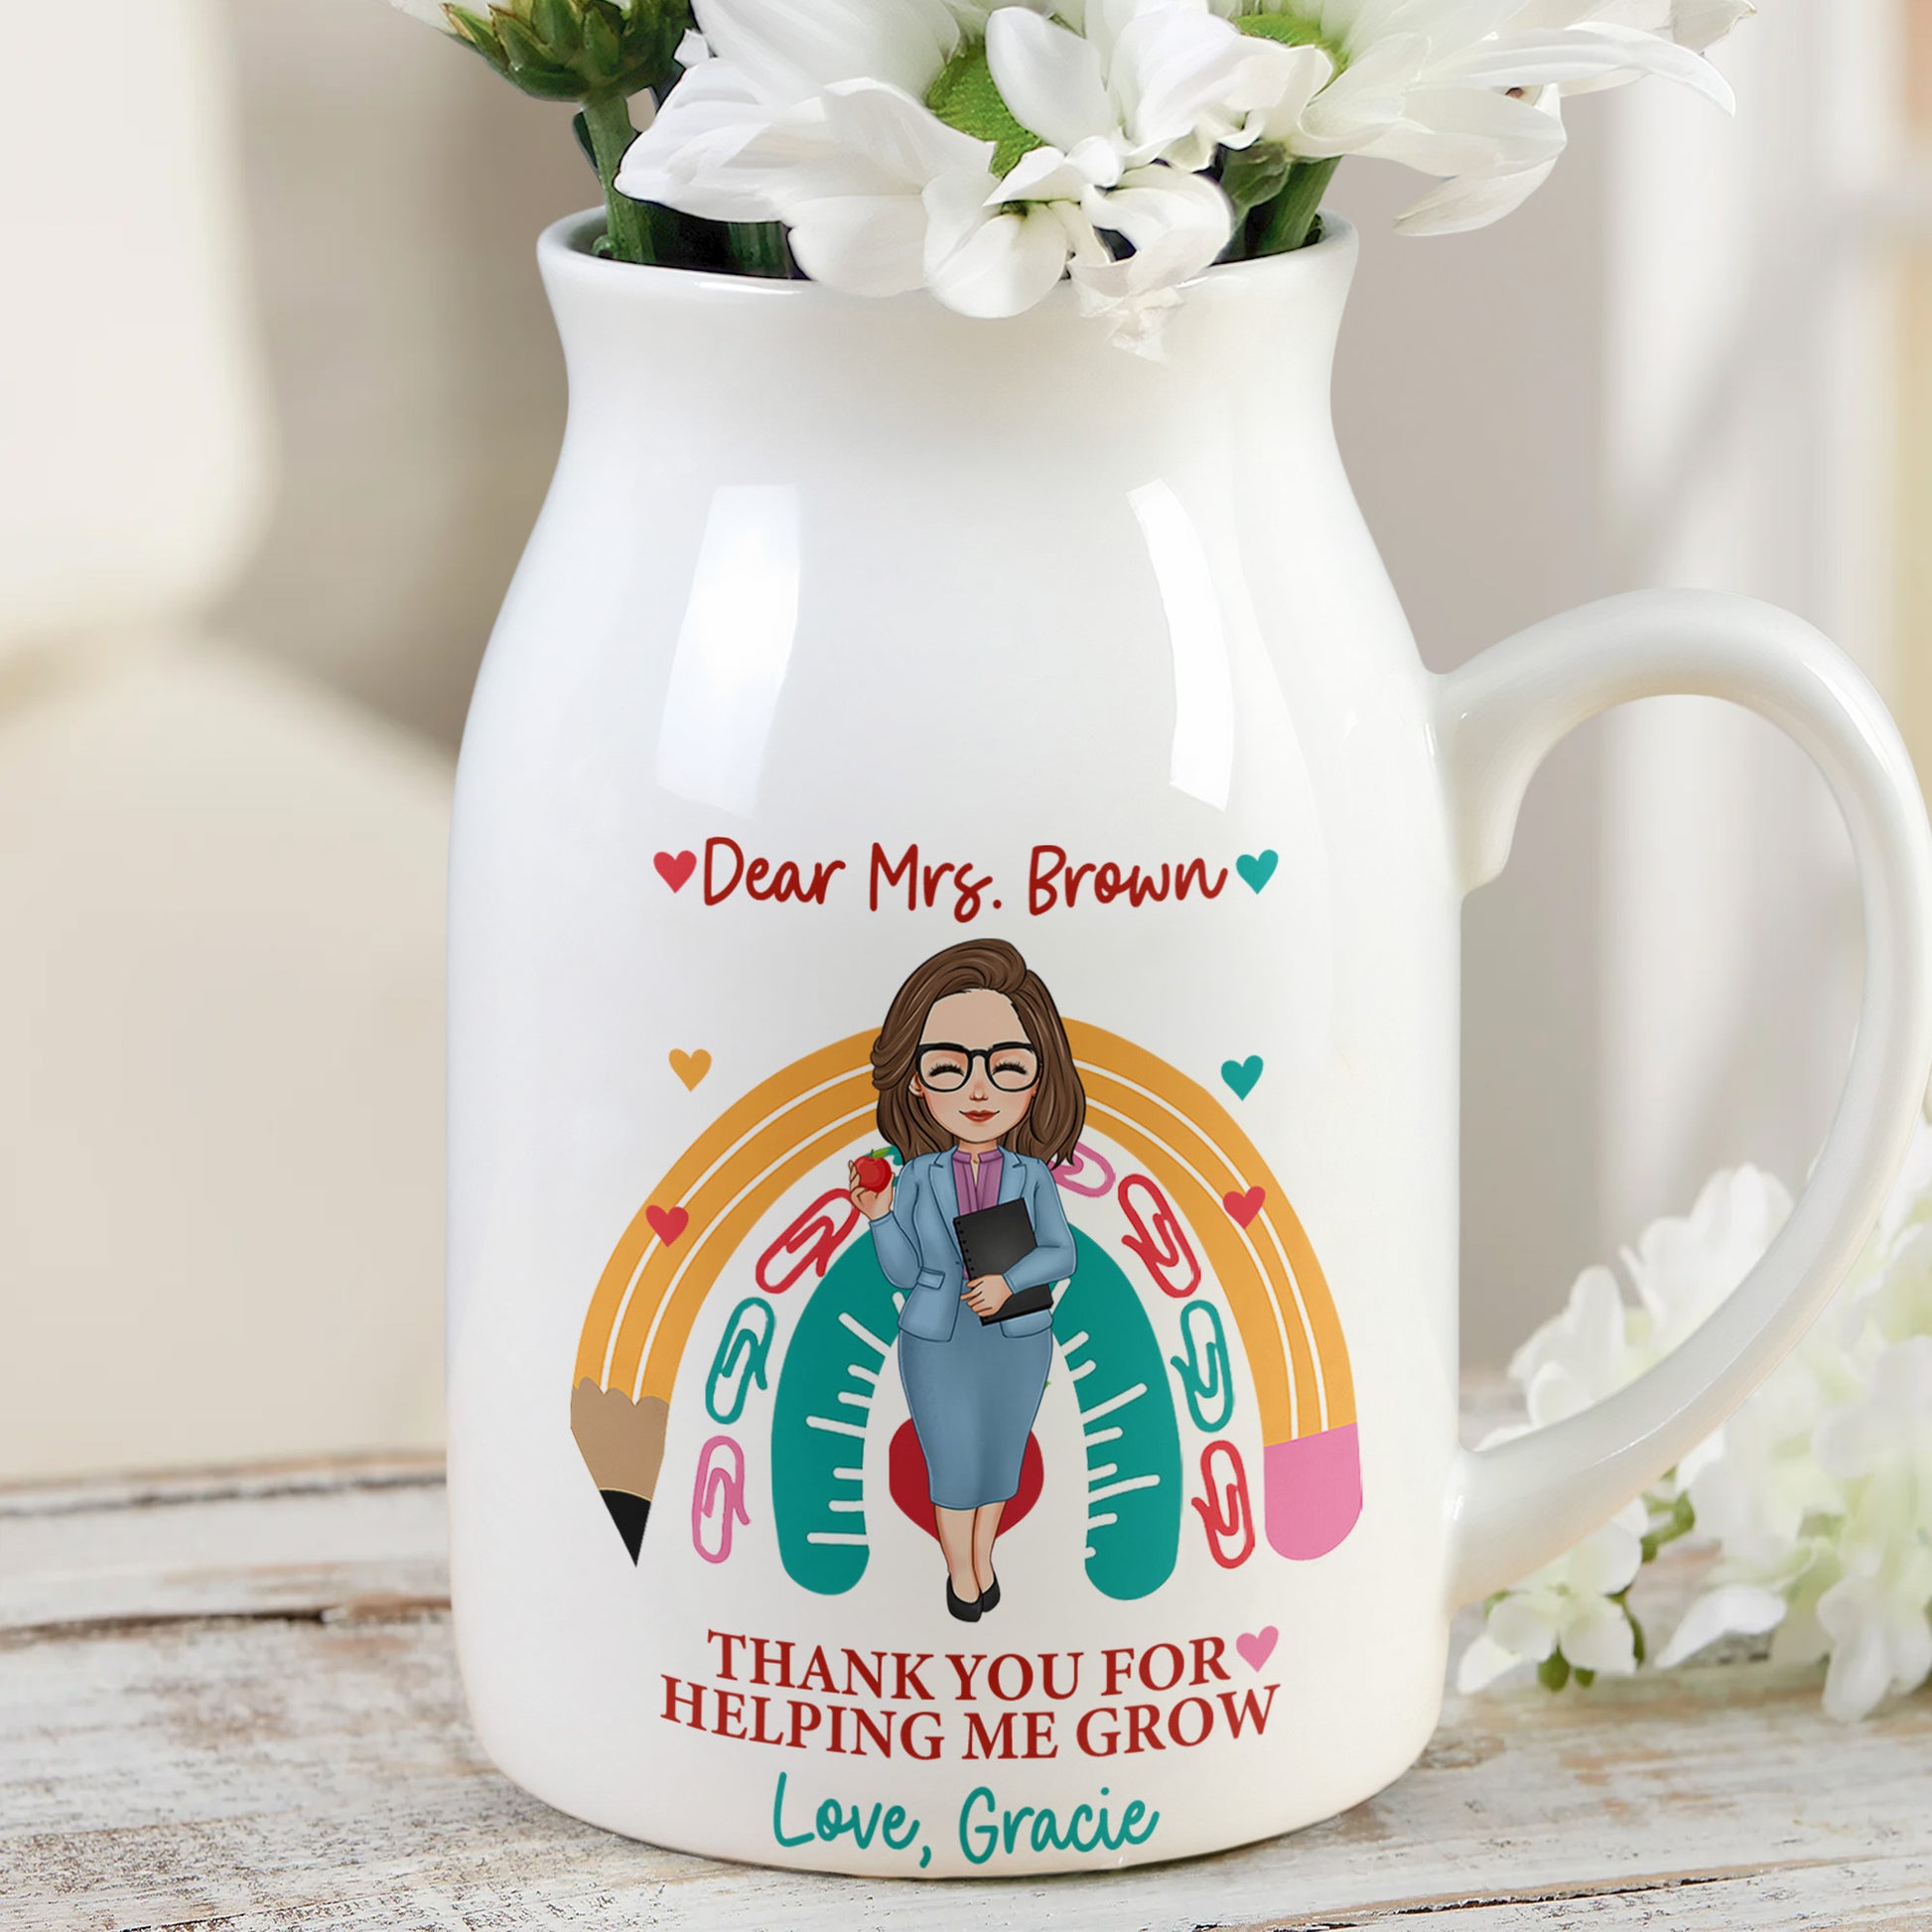 Thank You For Helping Me Grow - Personalized Ceramic Flower Vase